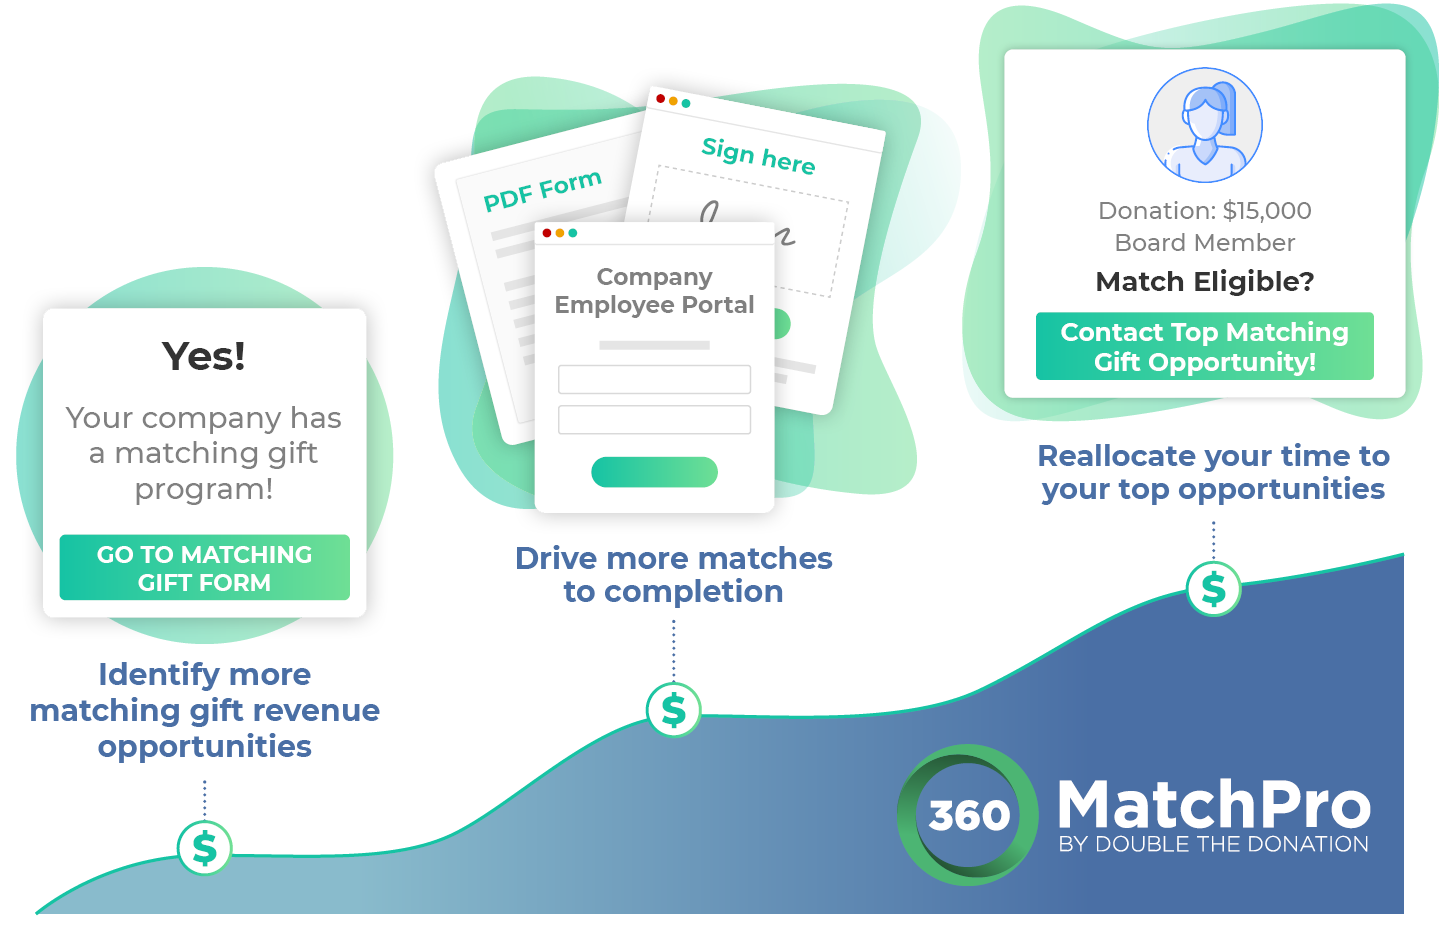 This image shows 360MatchPro benefits alongside an increasing graph to represent increased revenue. 